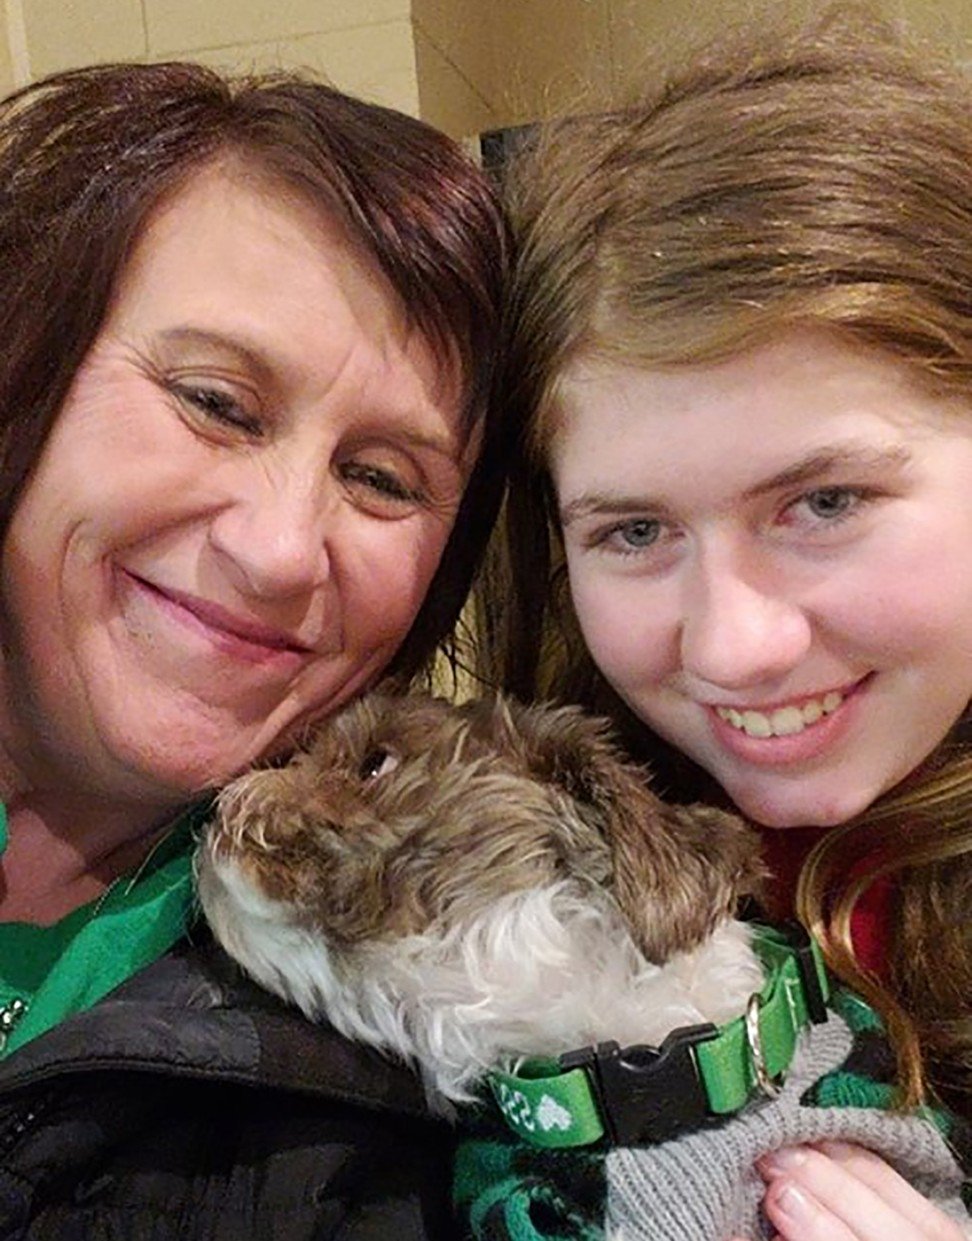 Thirteen-year-old Jayme Closs (right), her aunt Jennifer Naiberg Smith and Molly the dog posing together after being reunited on Friday. Photo: Agence France-Presse